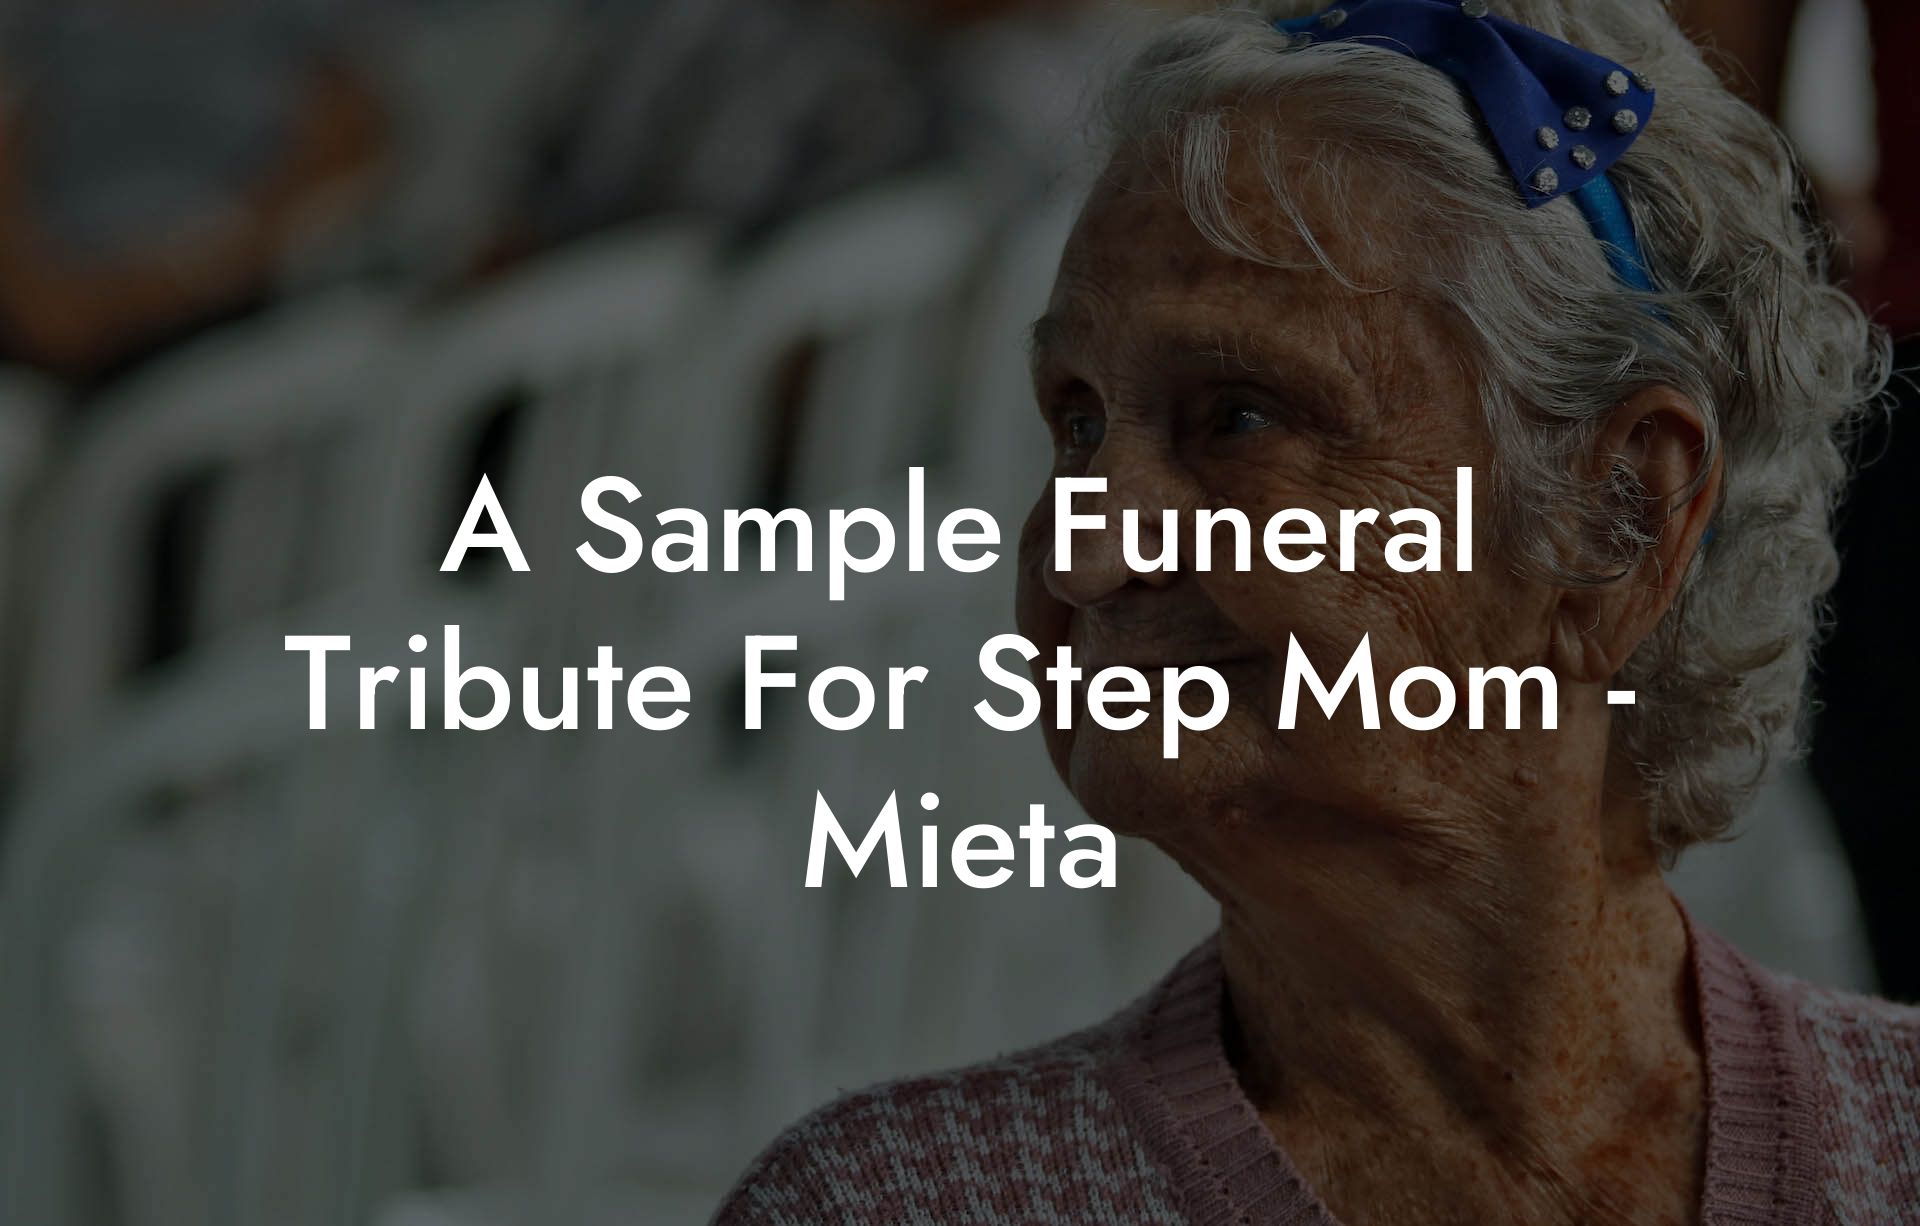 A Sample Funeral Tribute For Step Mom - Mieta